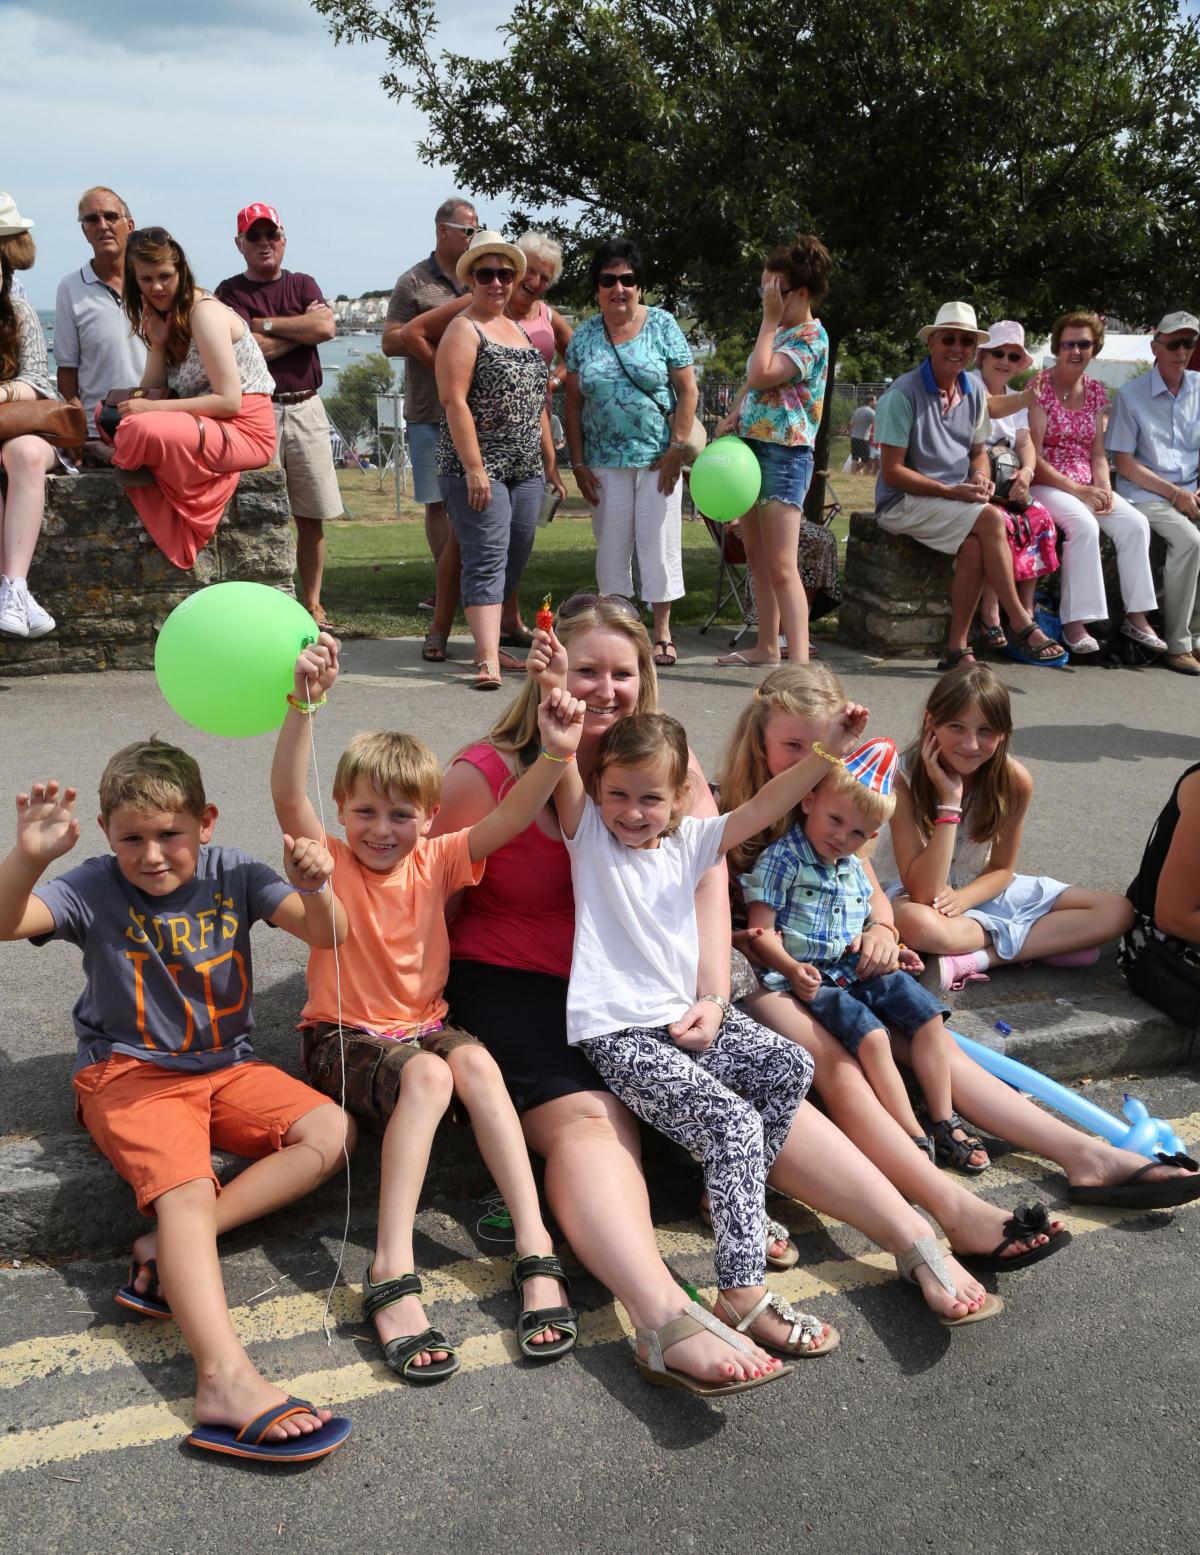 All our pictures from Swanage Carnival on Sunday, July 27